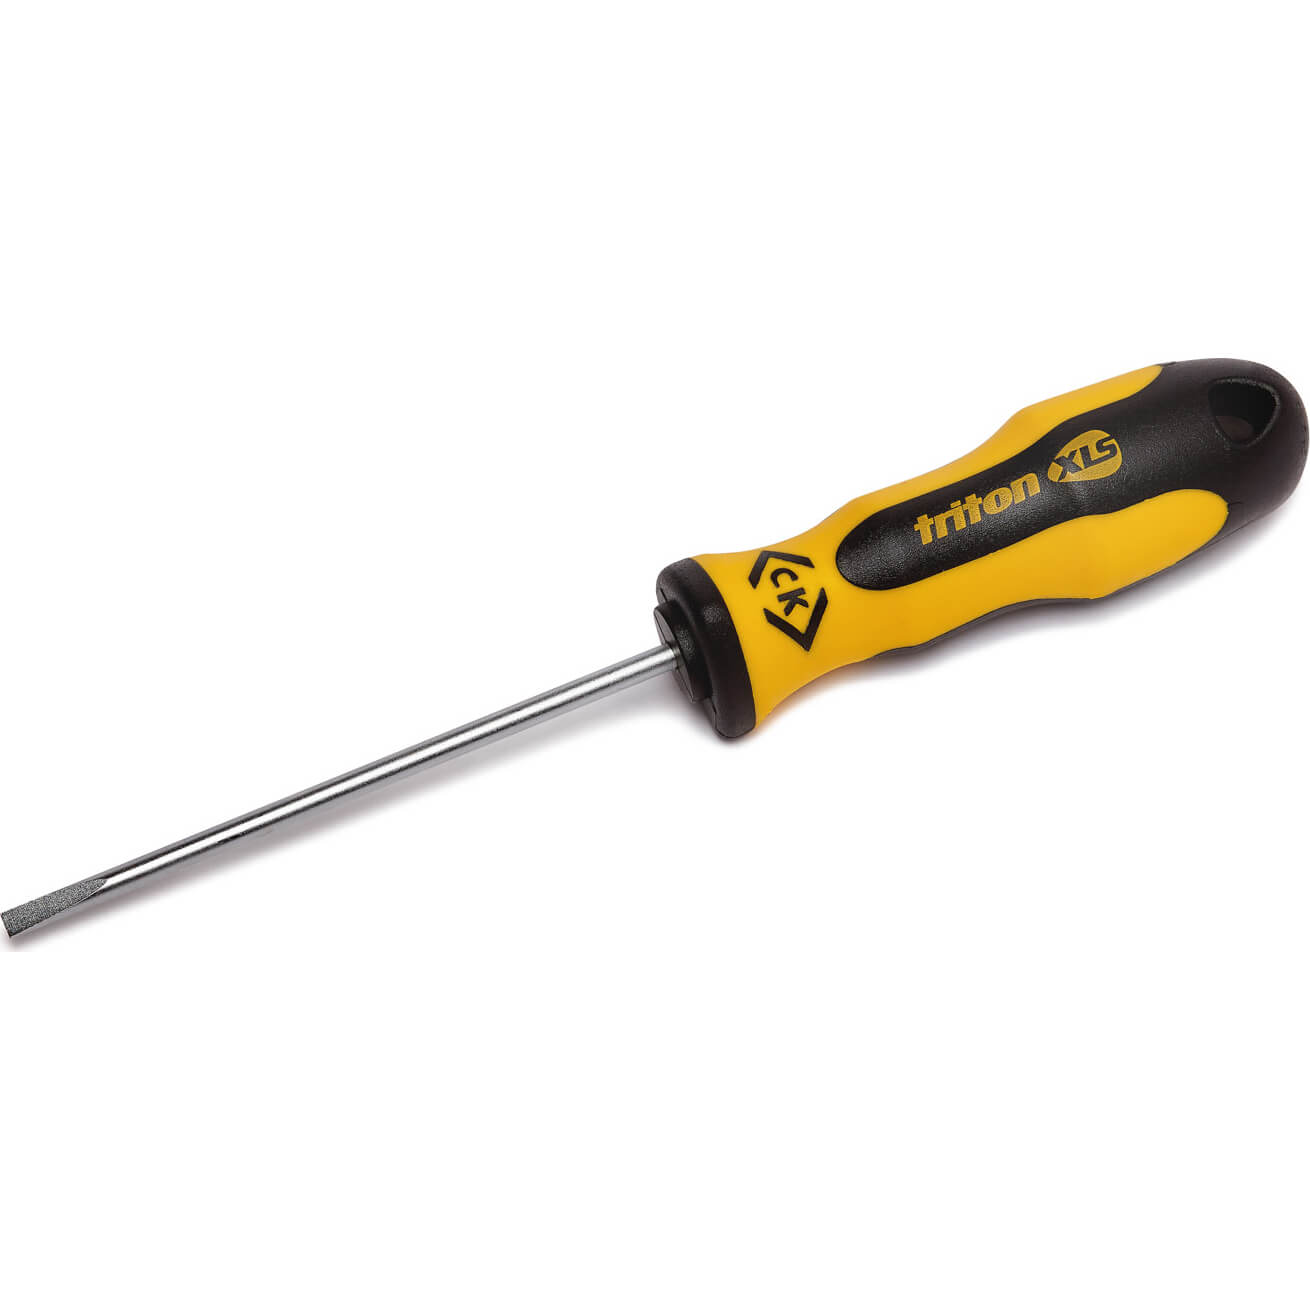 Image of CK Triton XLS Parallel Slotted Screwdriver 3mm 75mm